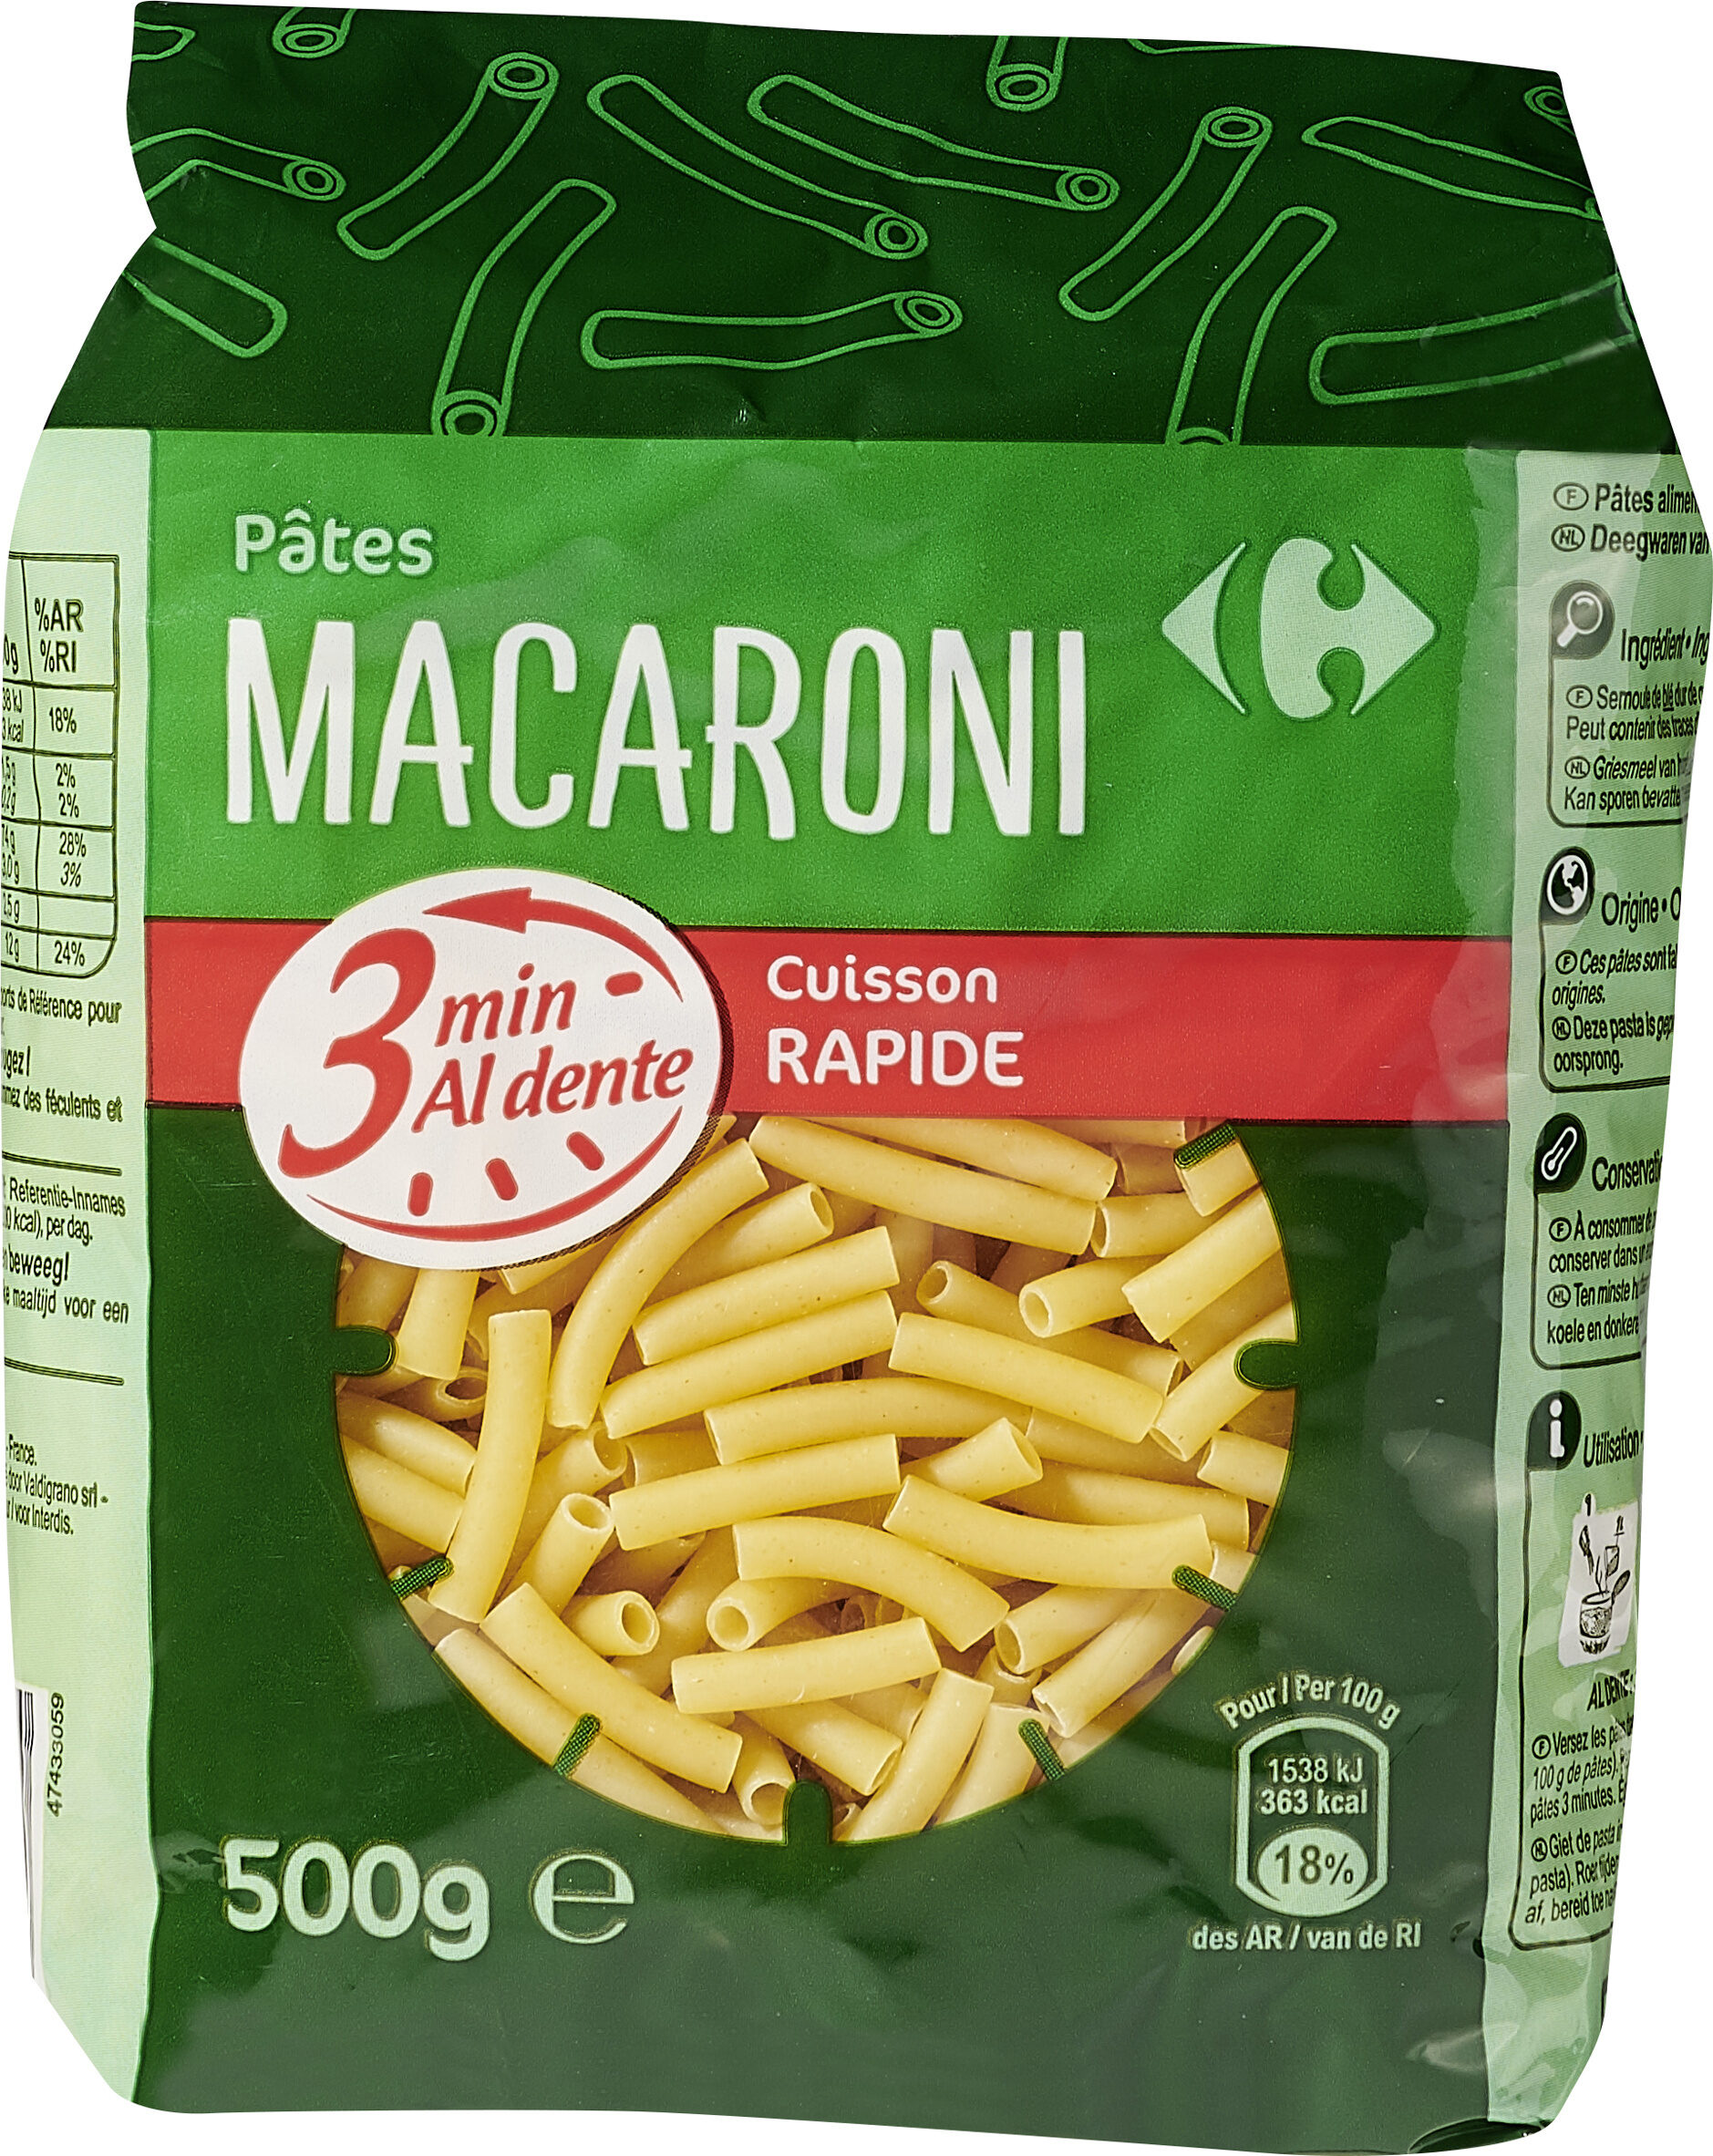 Macaroni (Cuisson rapide 3 min) - Product - fr